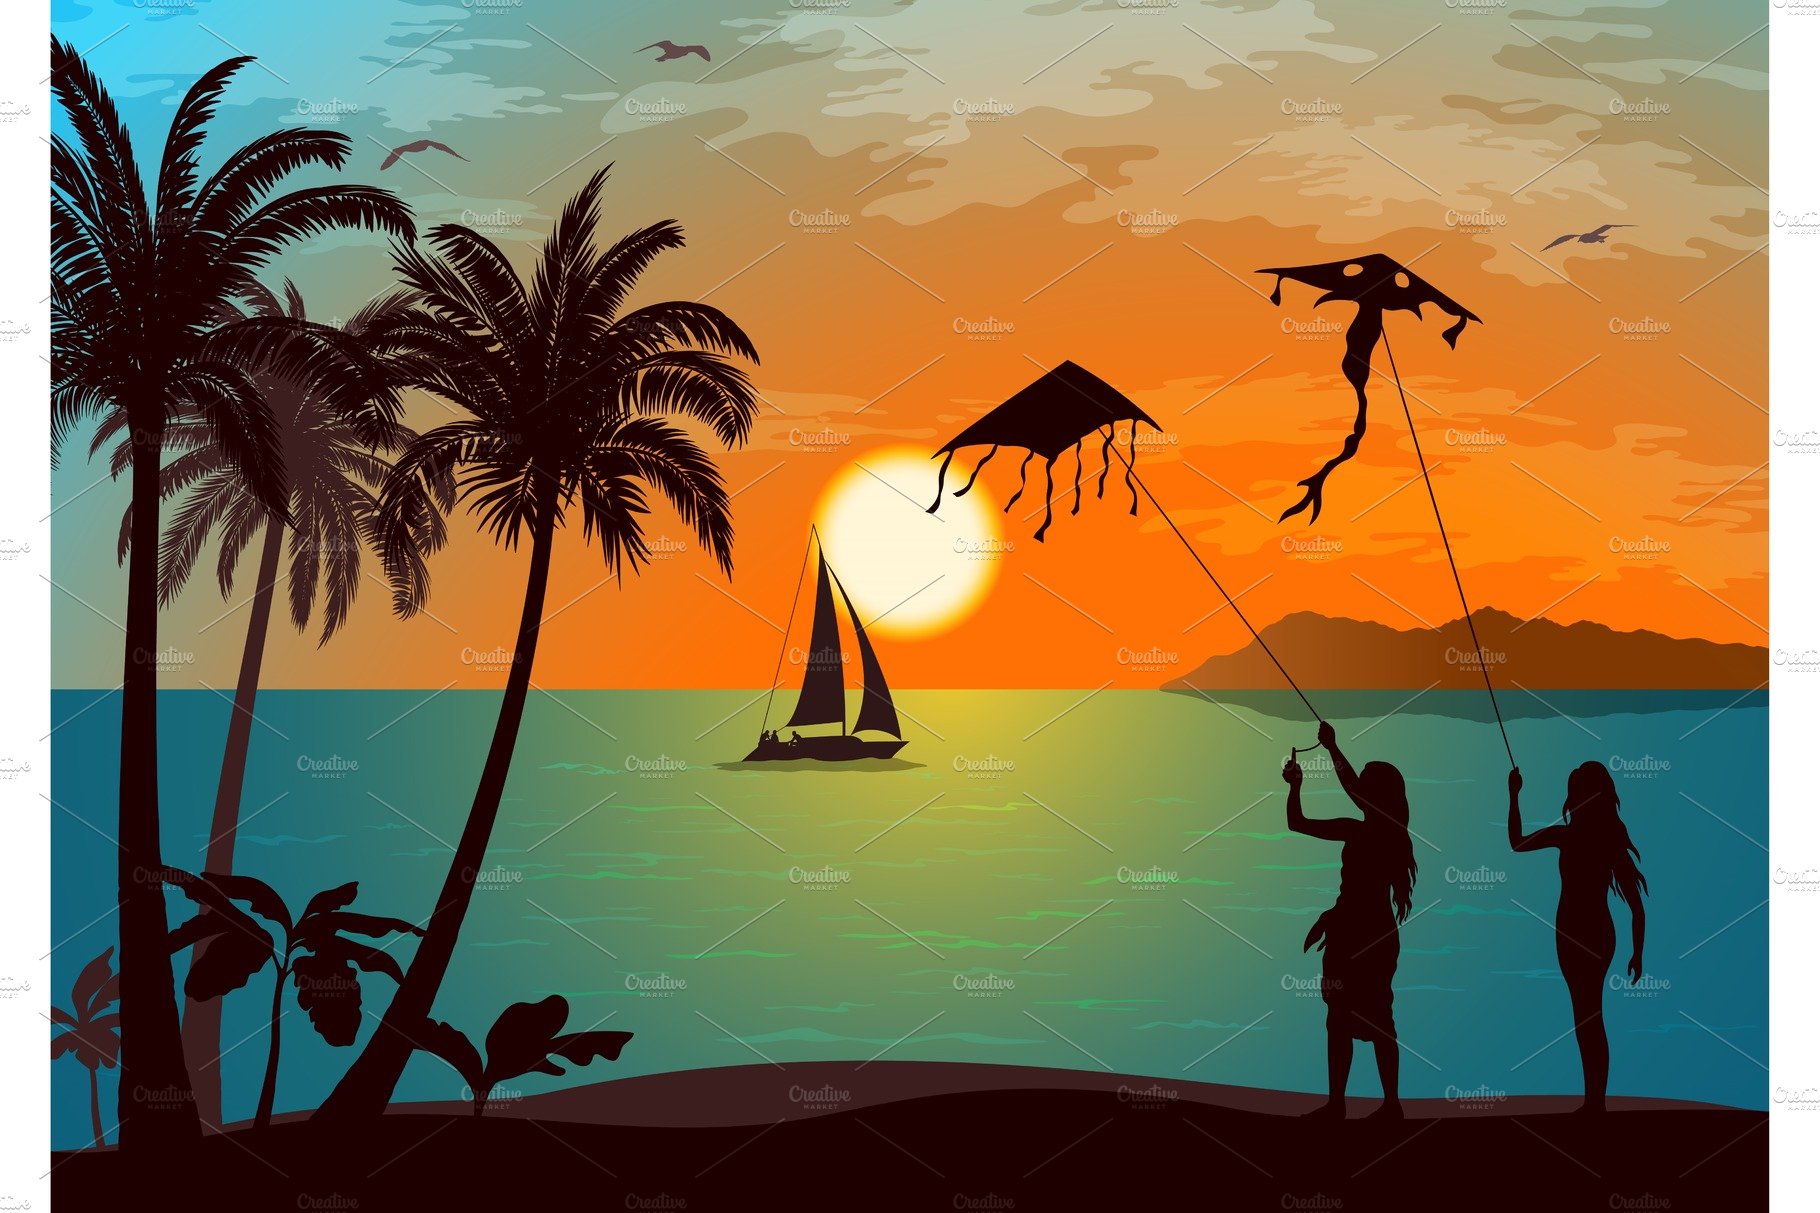 People with Kites on Tropical Beach cover image.